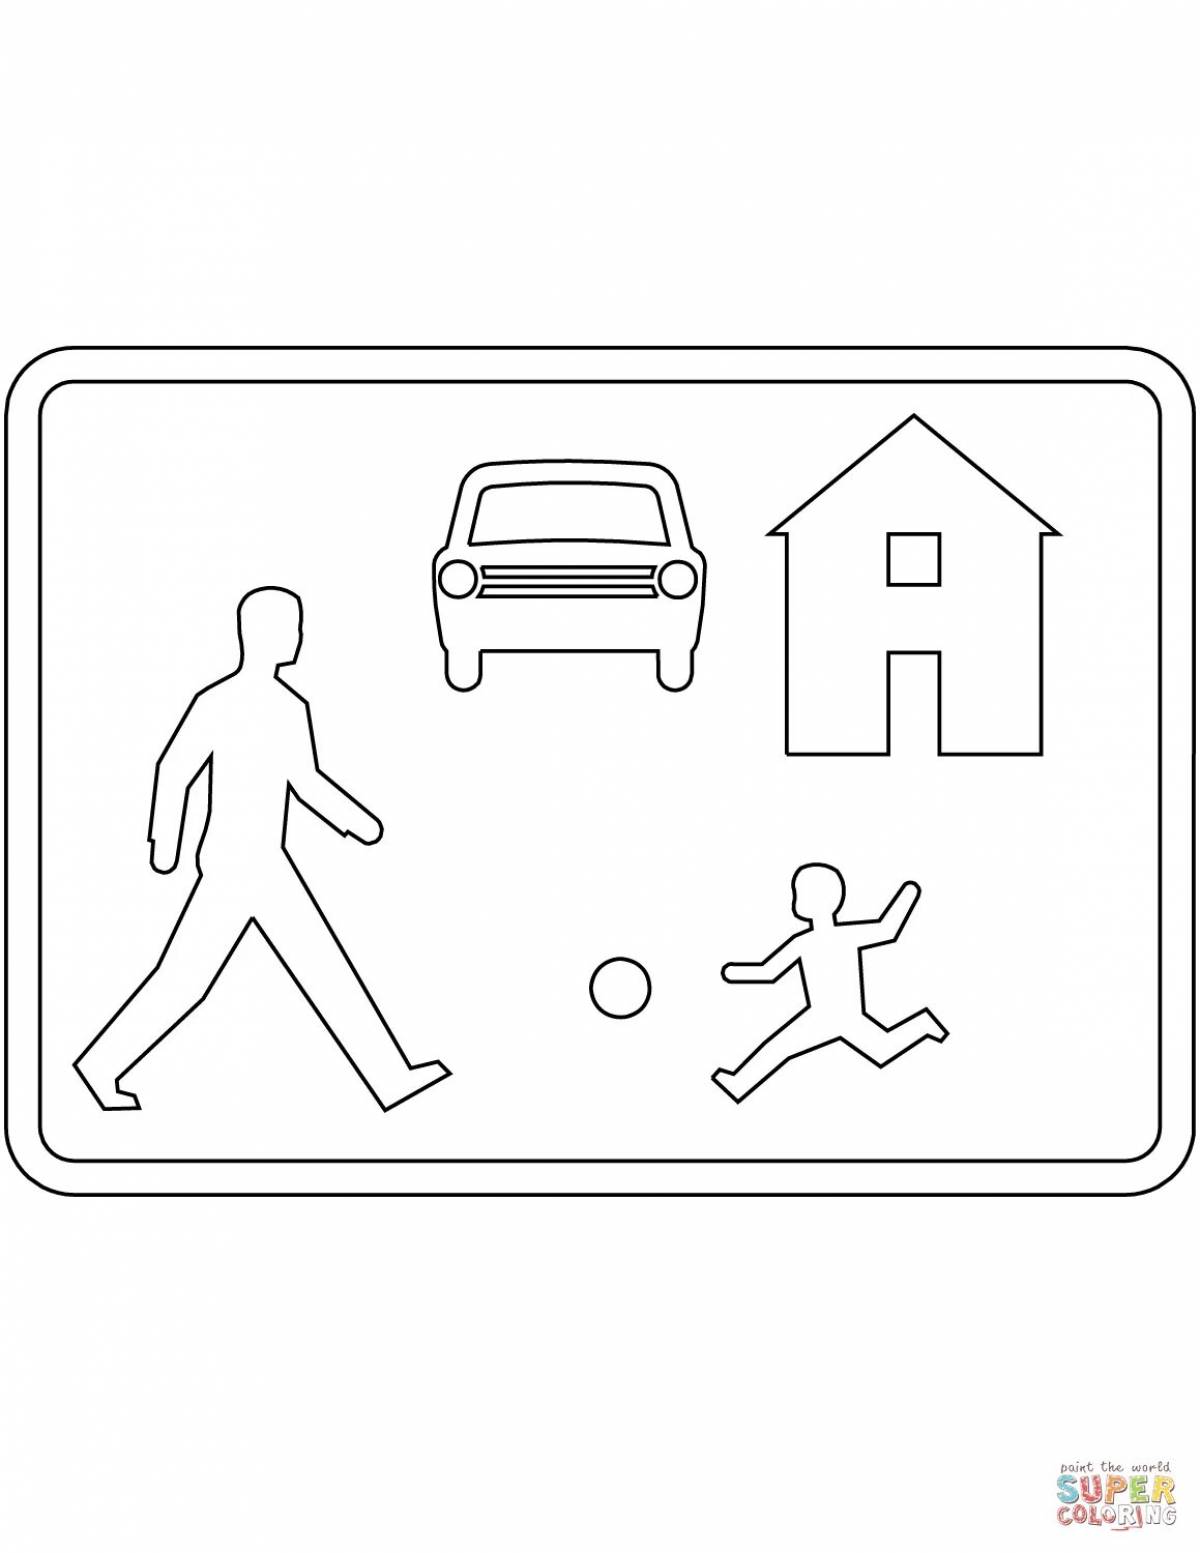 Coloring page consolation sign of a residential area